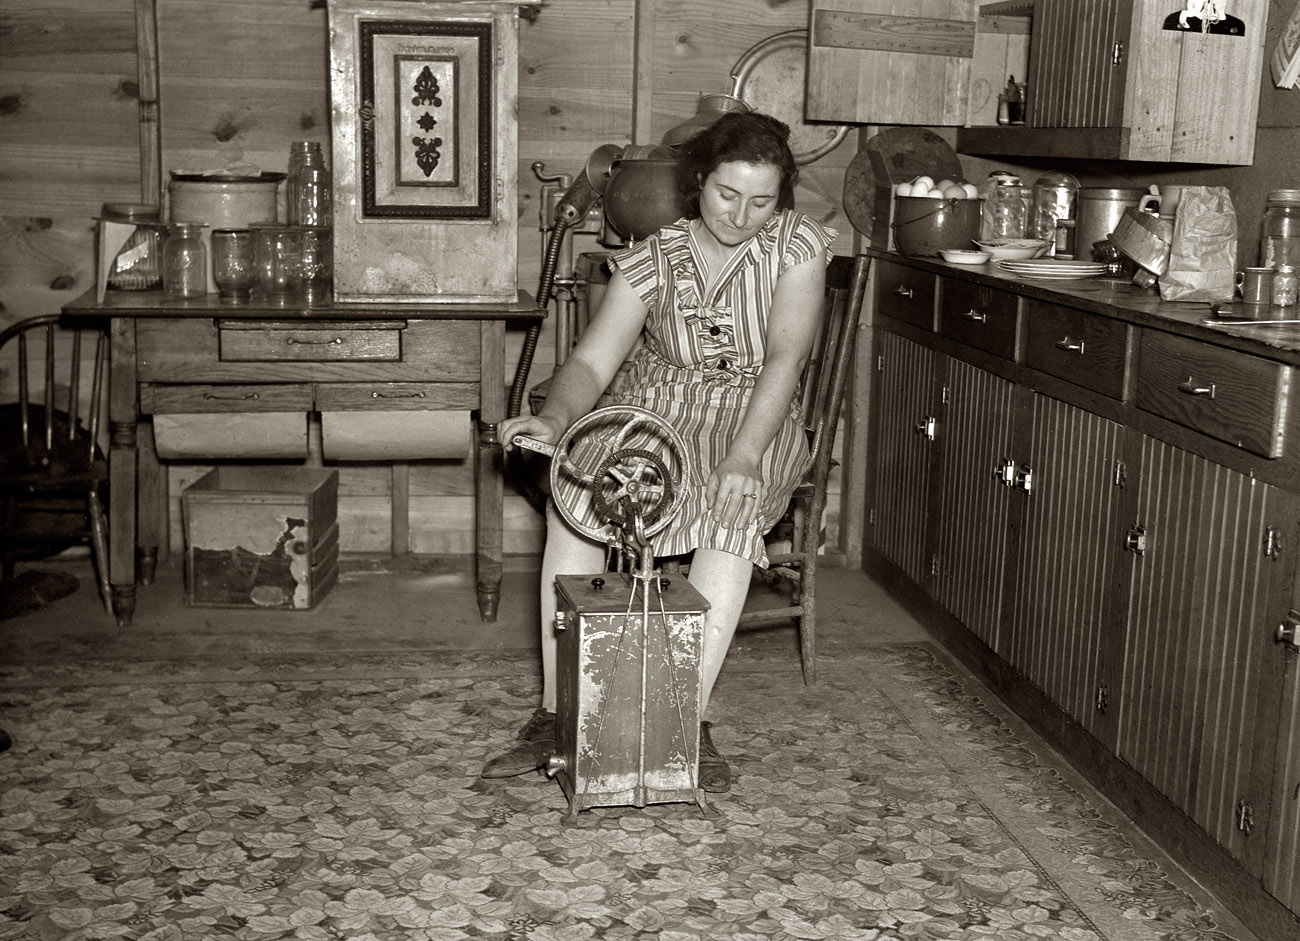 December 1936. "Farmer's wife churning butter. Emmet County, Iowa." Medium-format nitrate negative by Russell Lee. View full size.